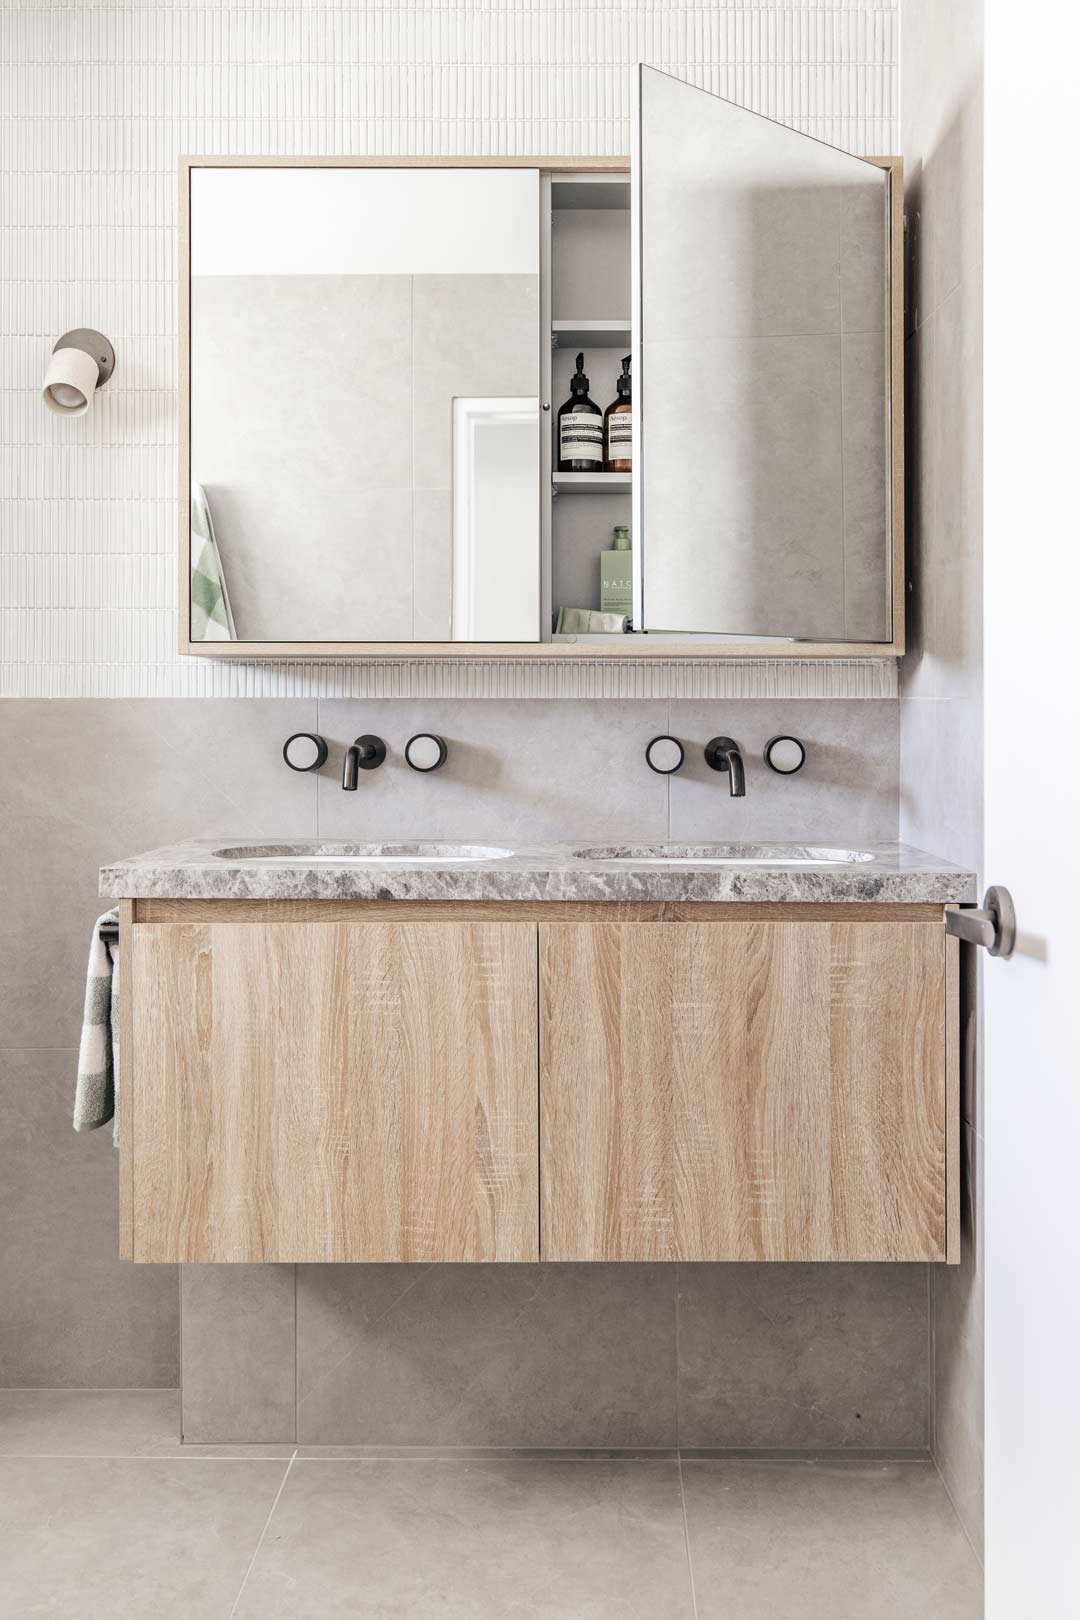 A new cost effective vanity is a great way to refresh your space for your renovation